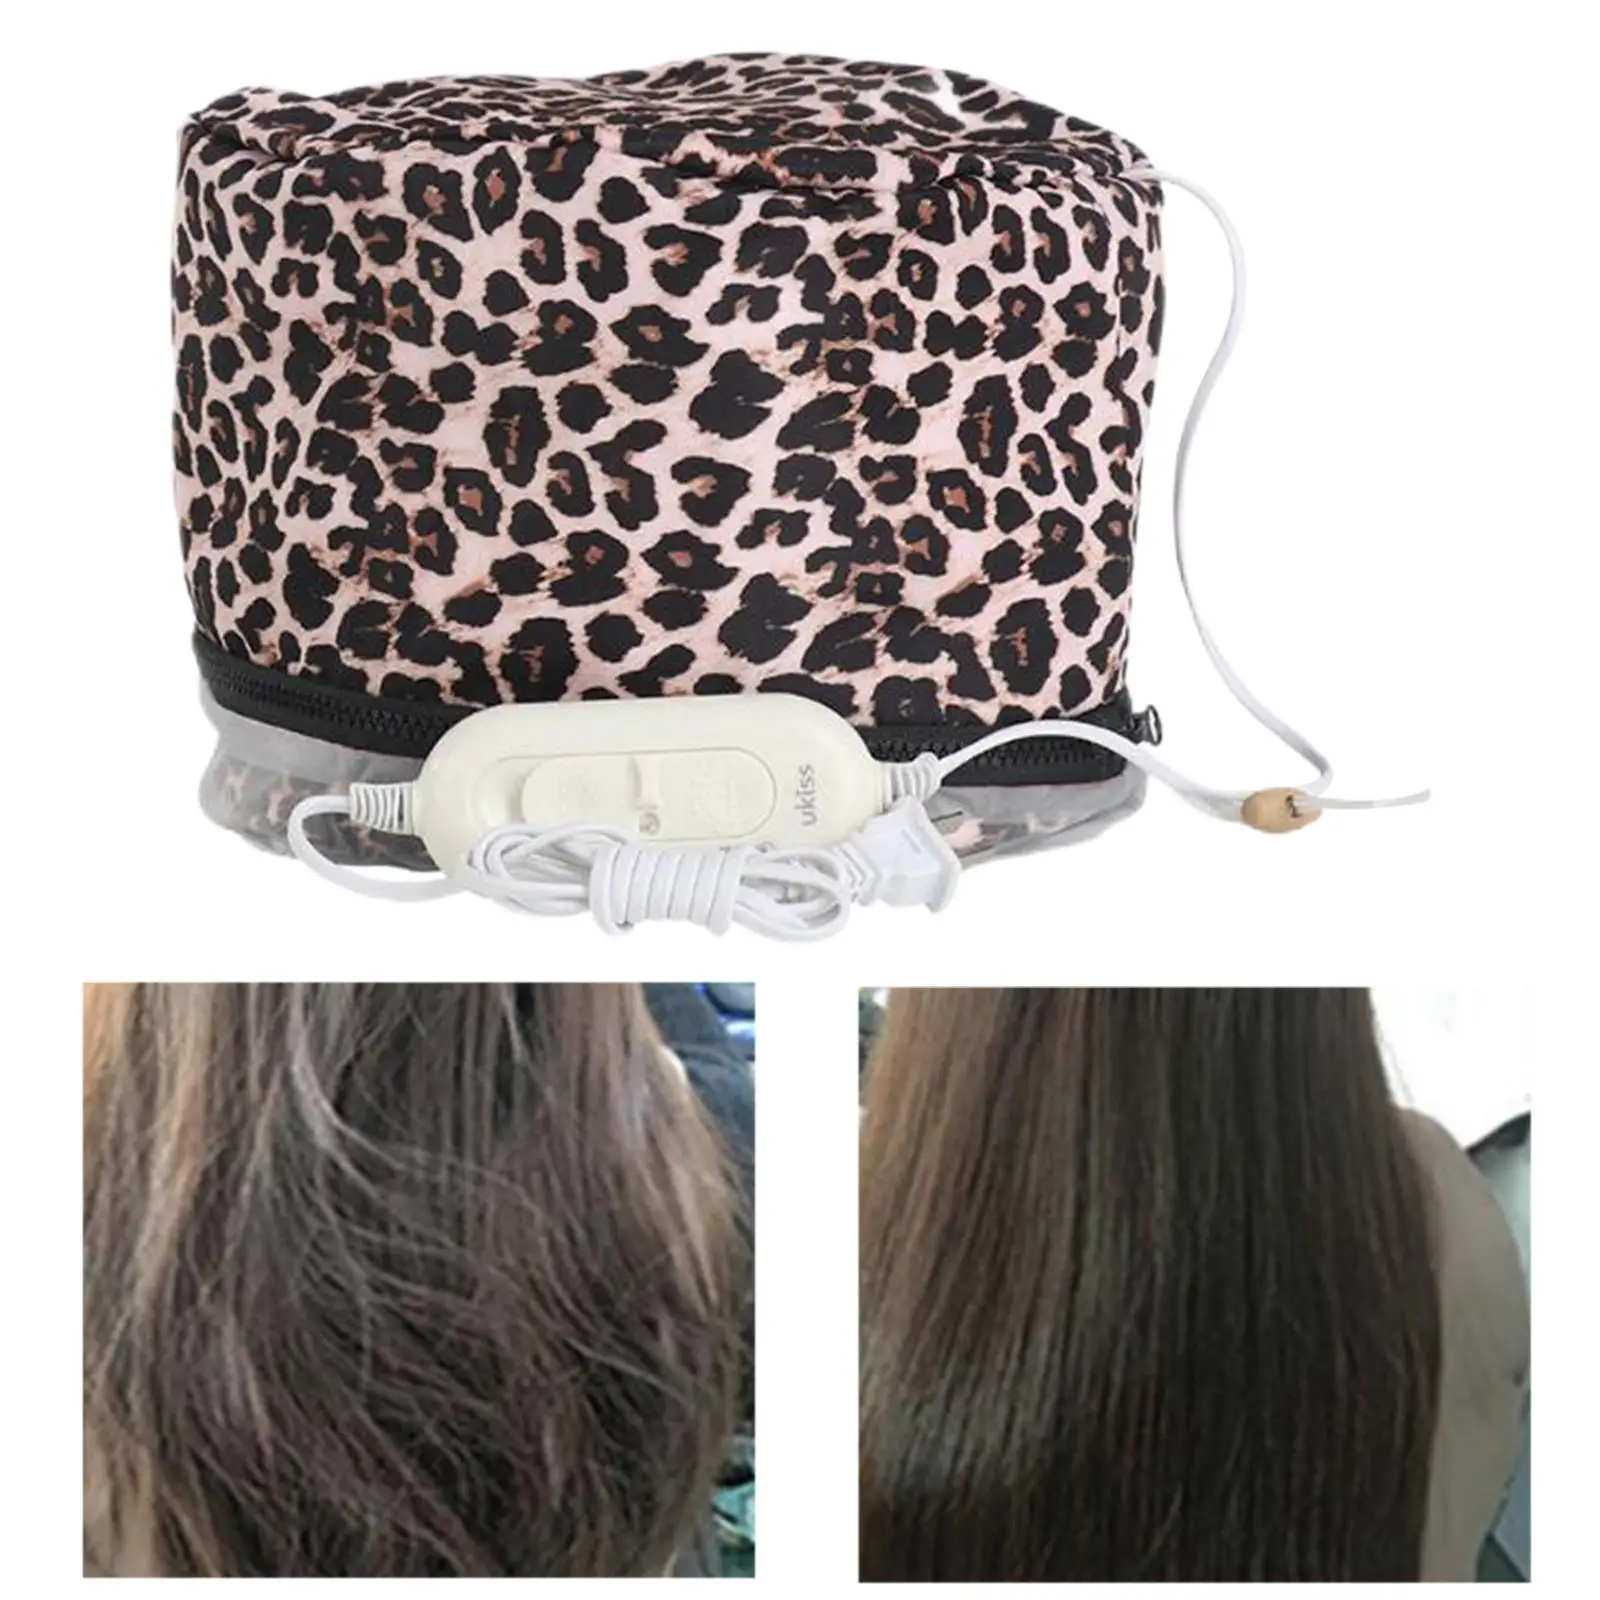 Hair Care Steamer Hat Deep Conditioner 110V Thermal Hair Caps 3 Modes Temperature Control Leopard Print Family Personal Care US